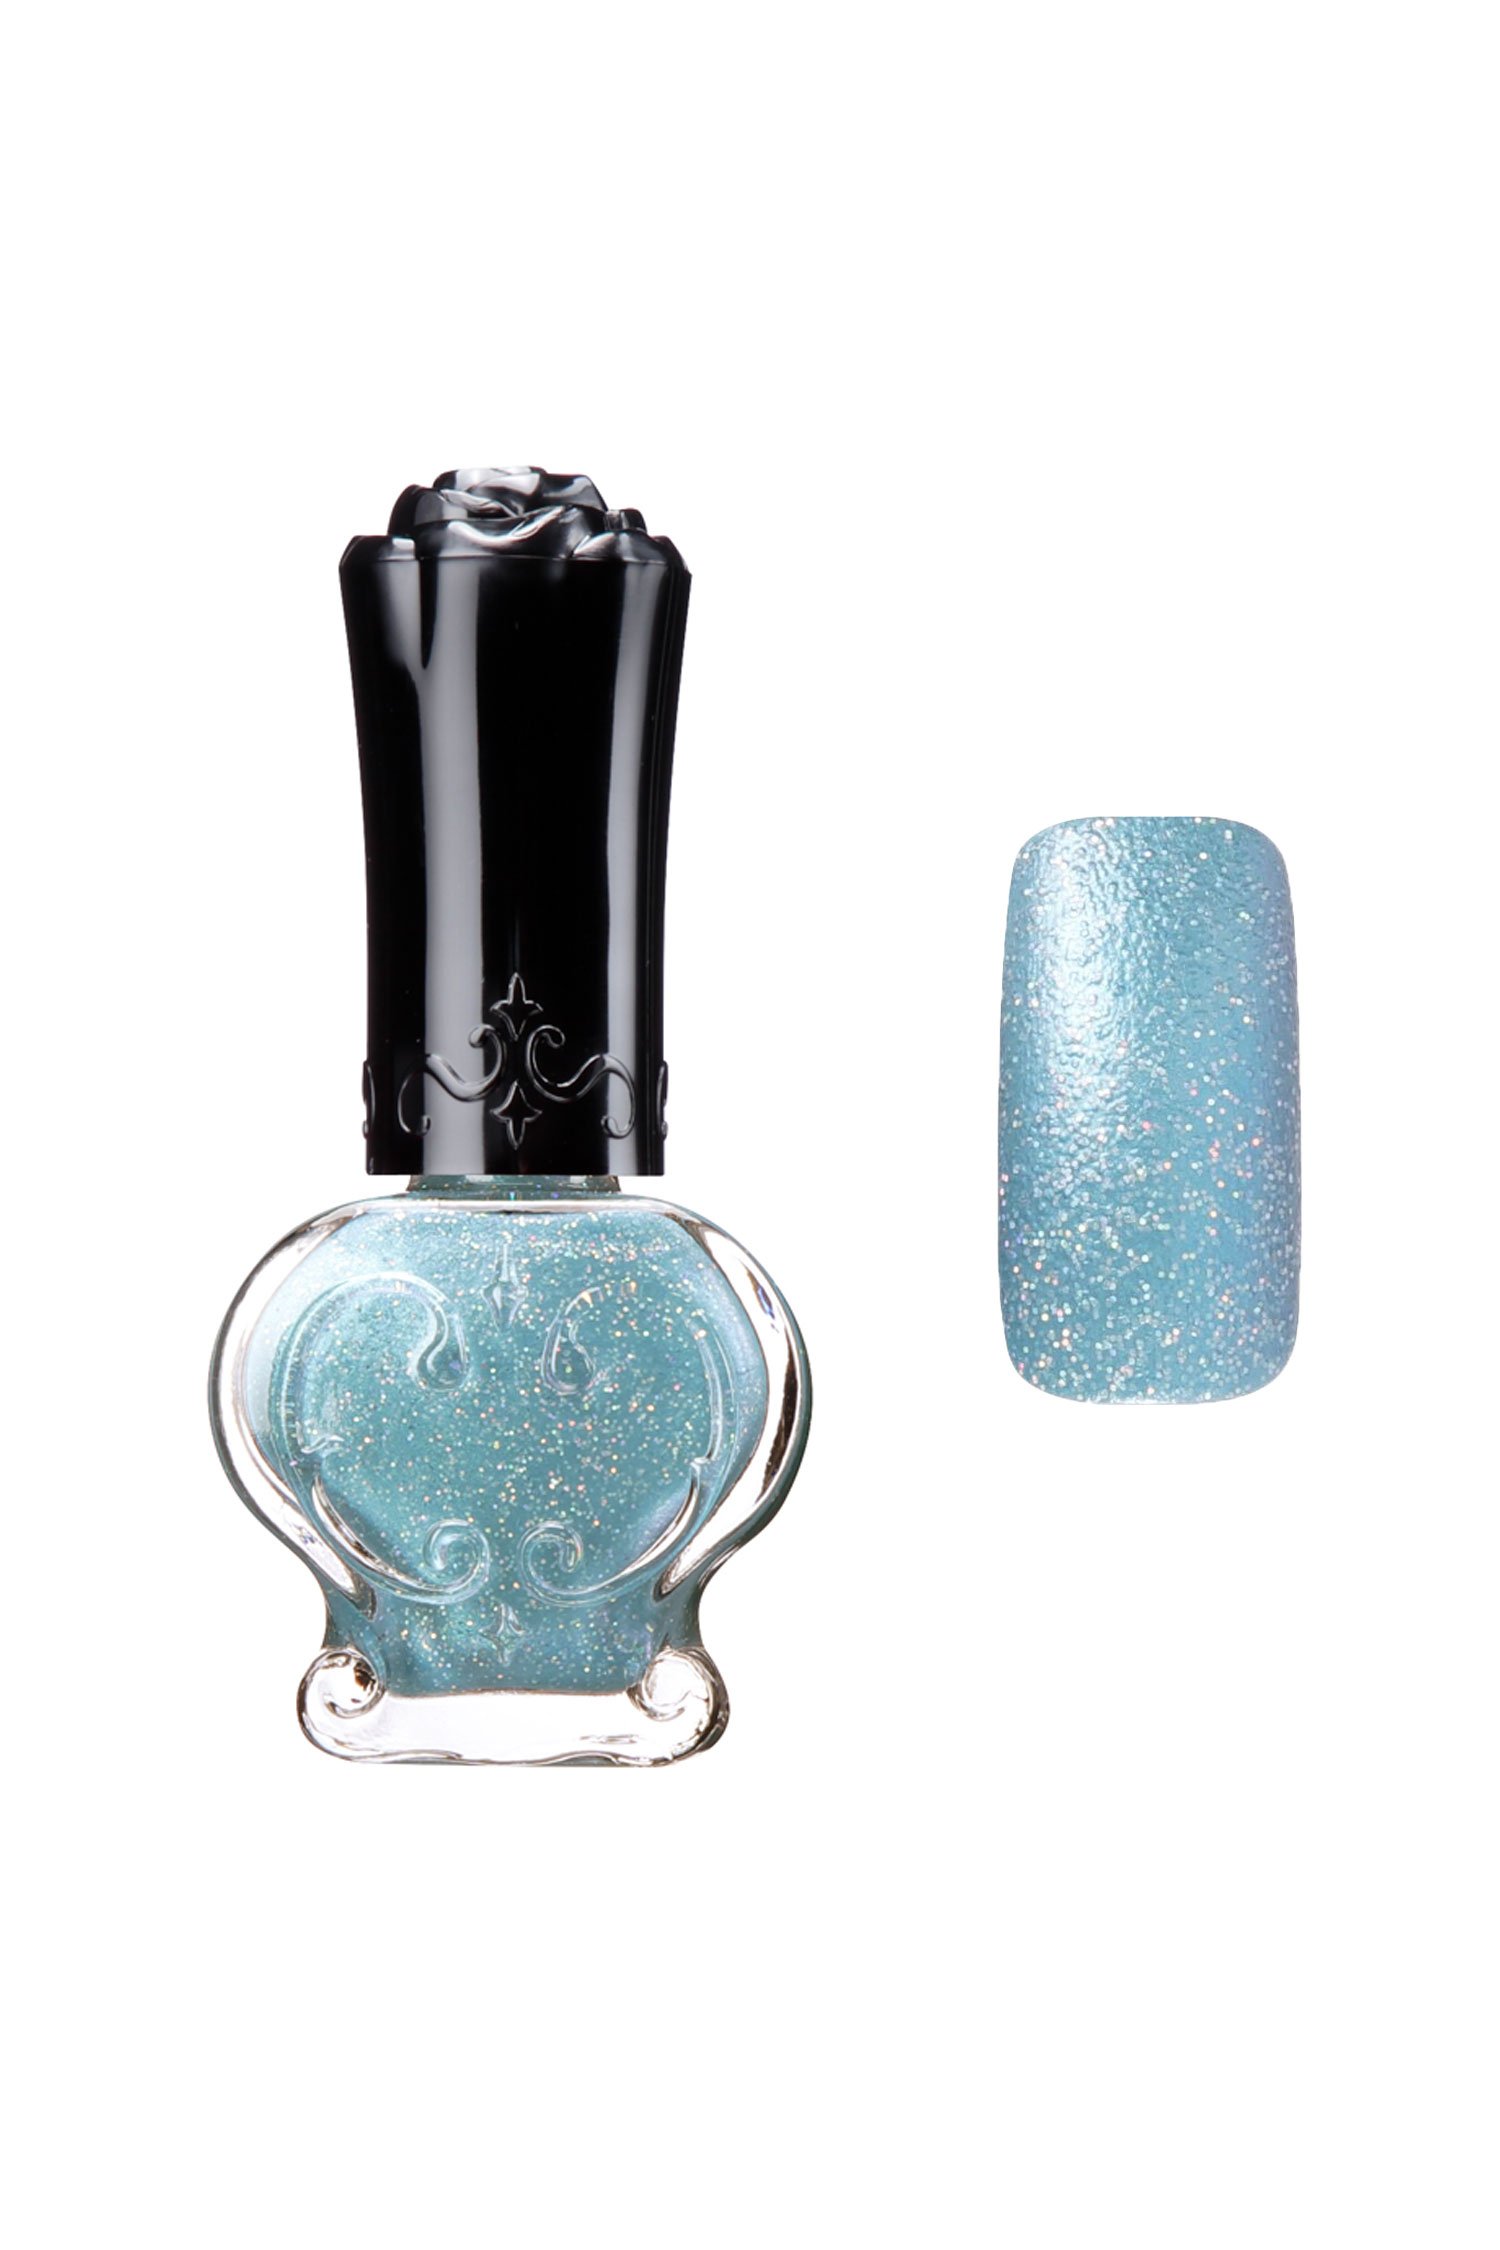 Black and silver gradation with Anna Sui #003 nail polish